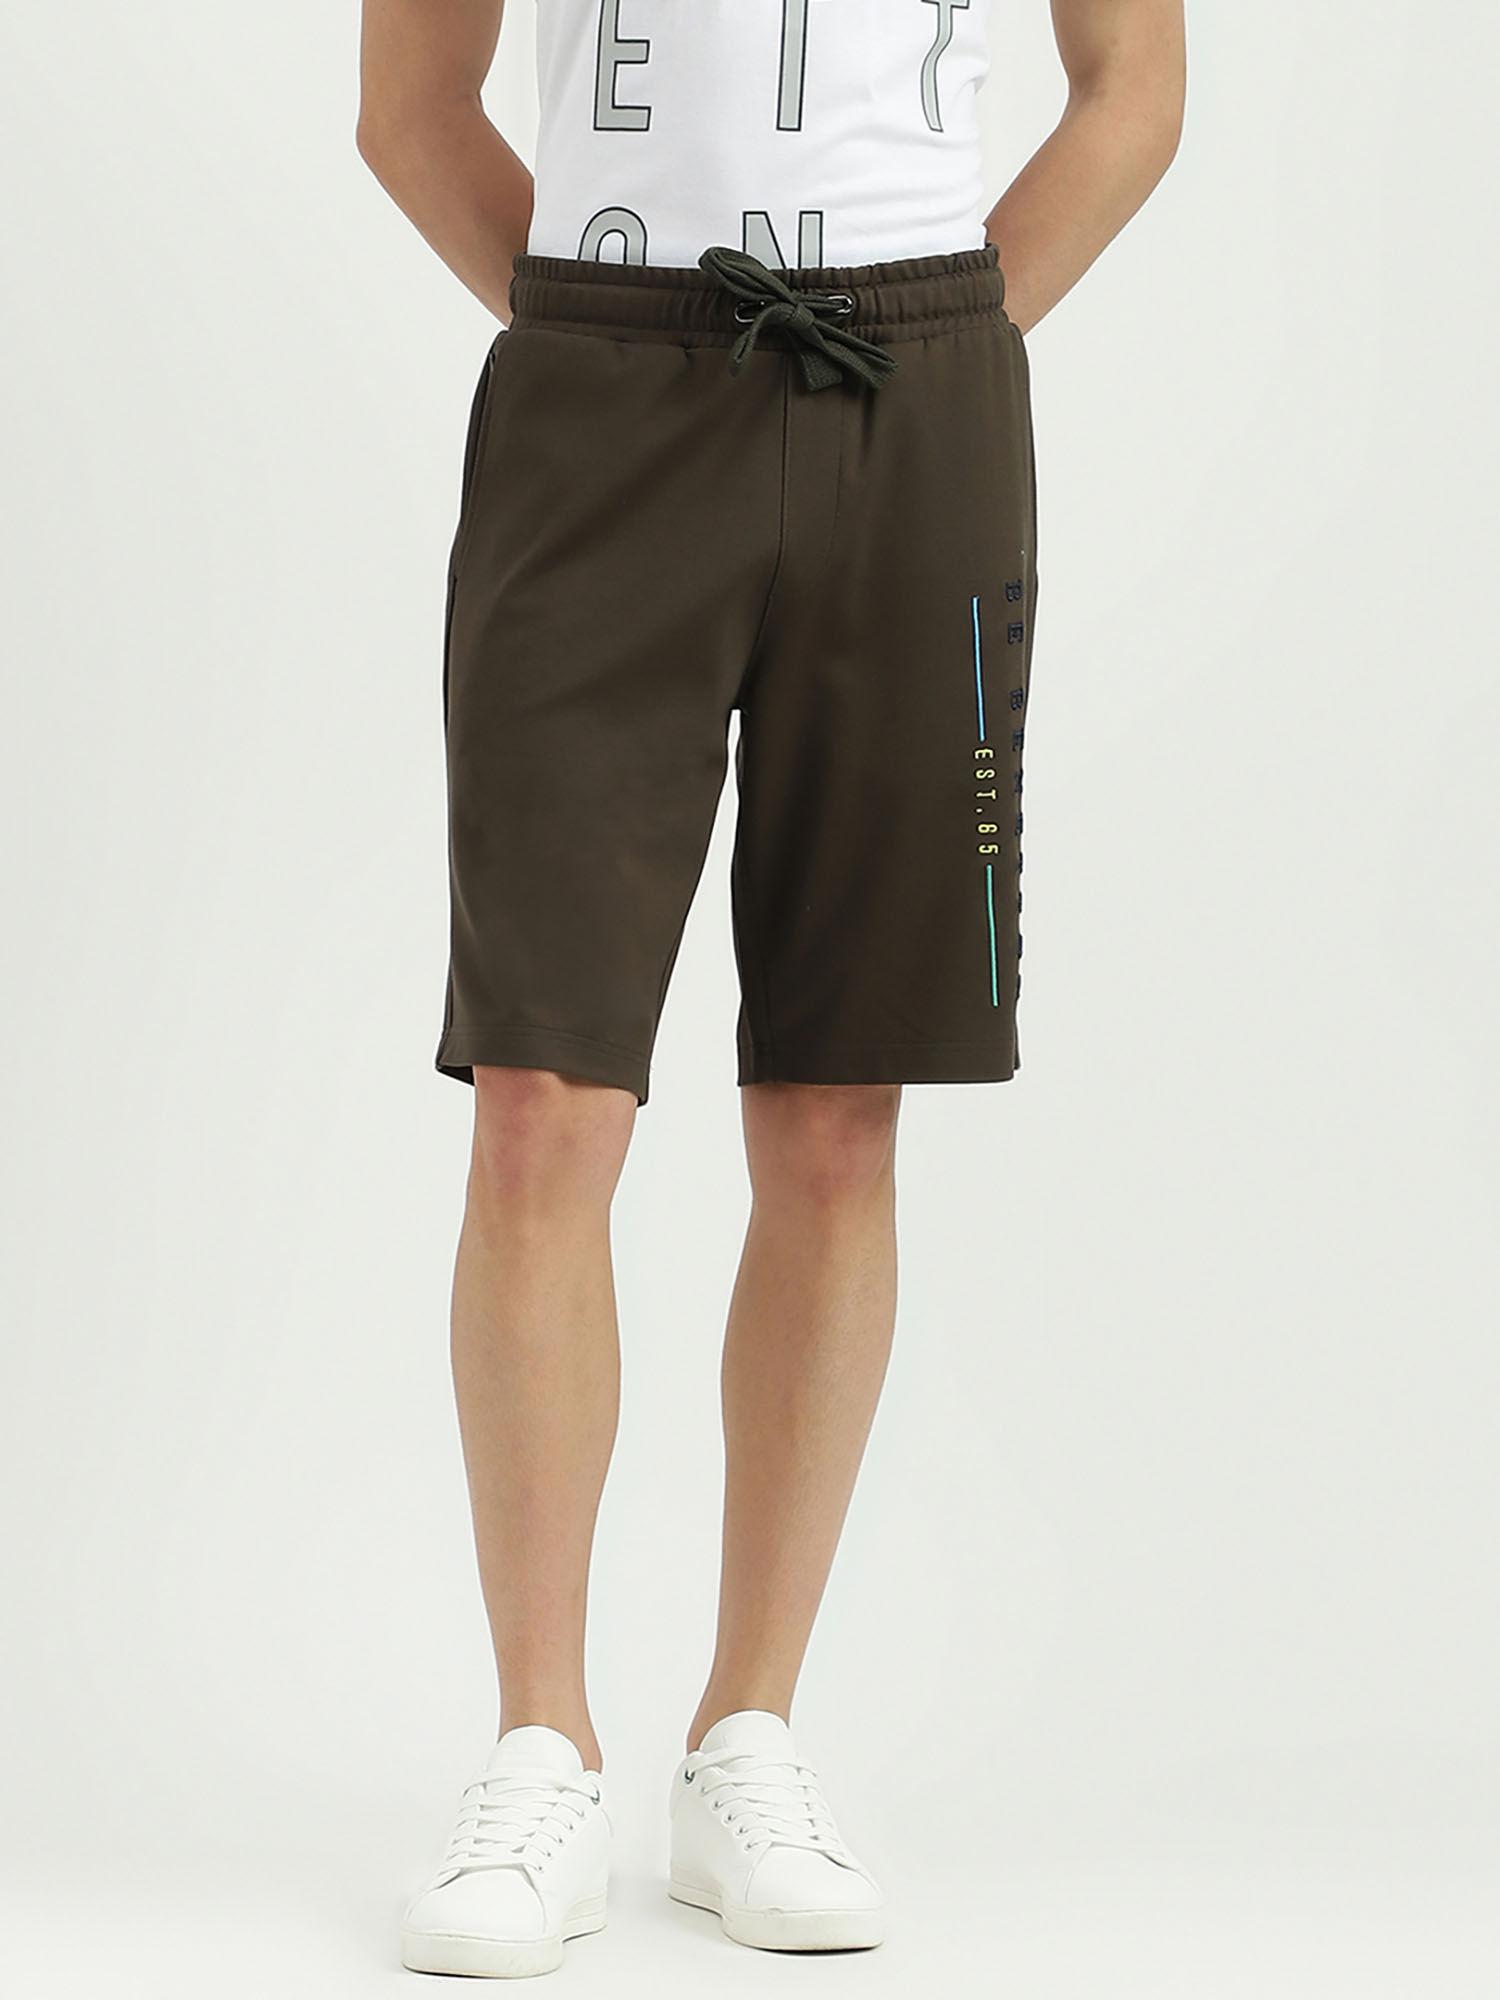 embroidered-regular-fit-mid-waist-shorts